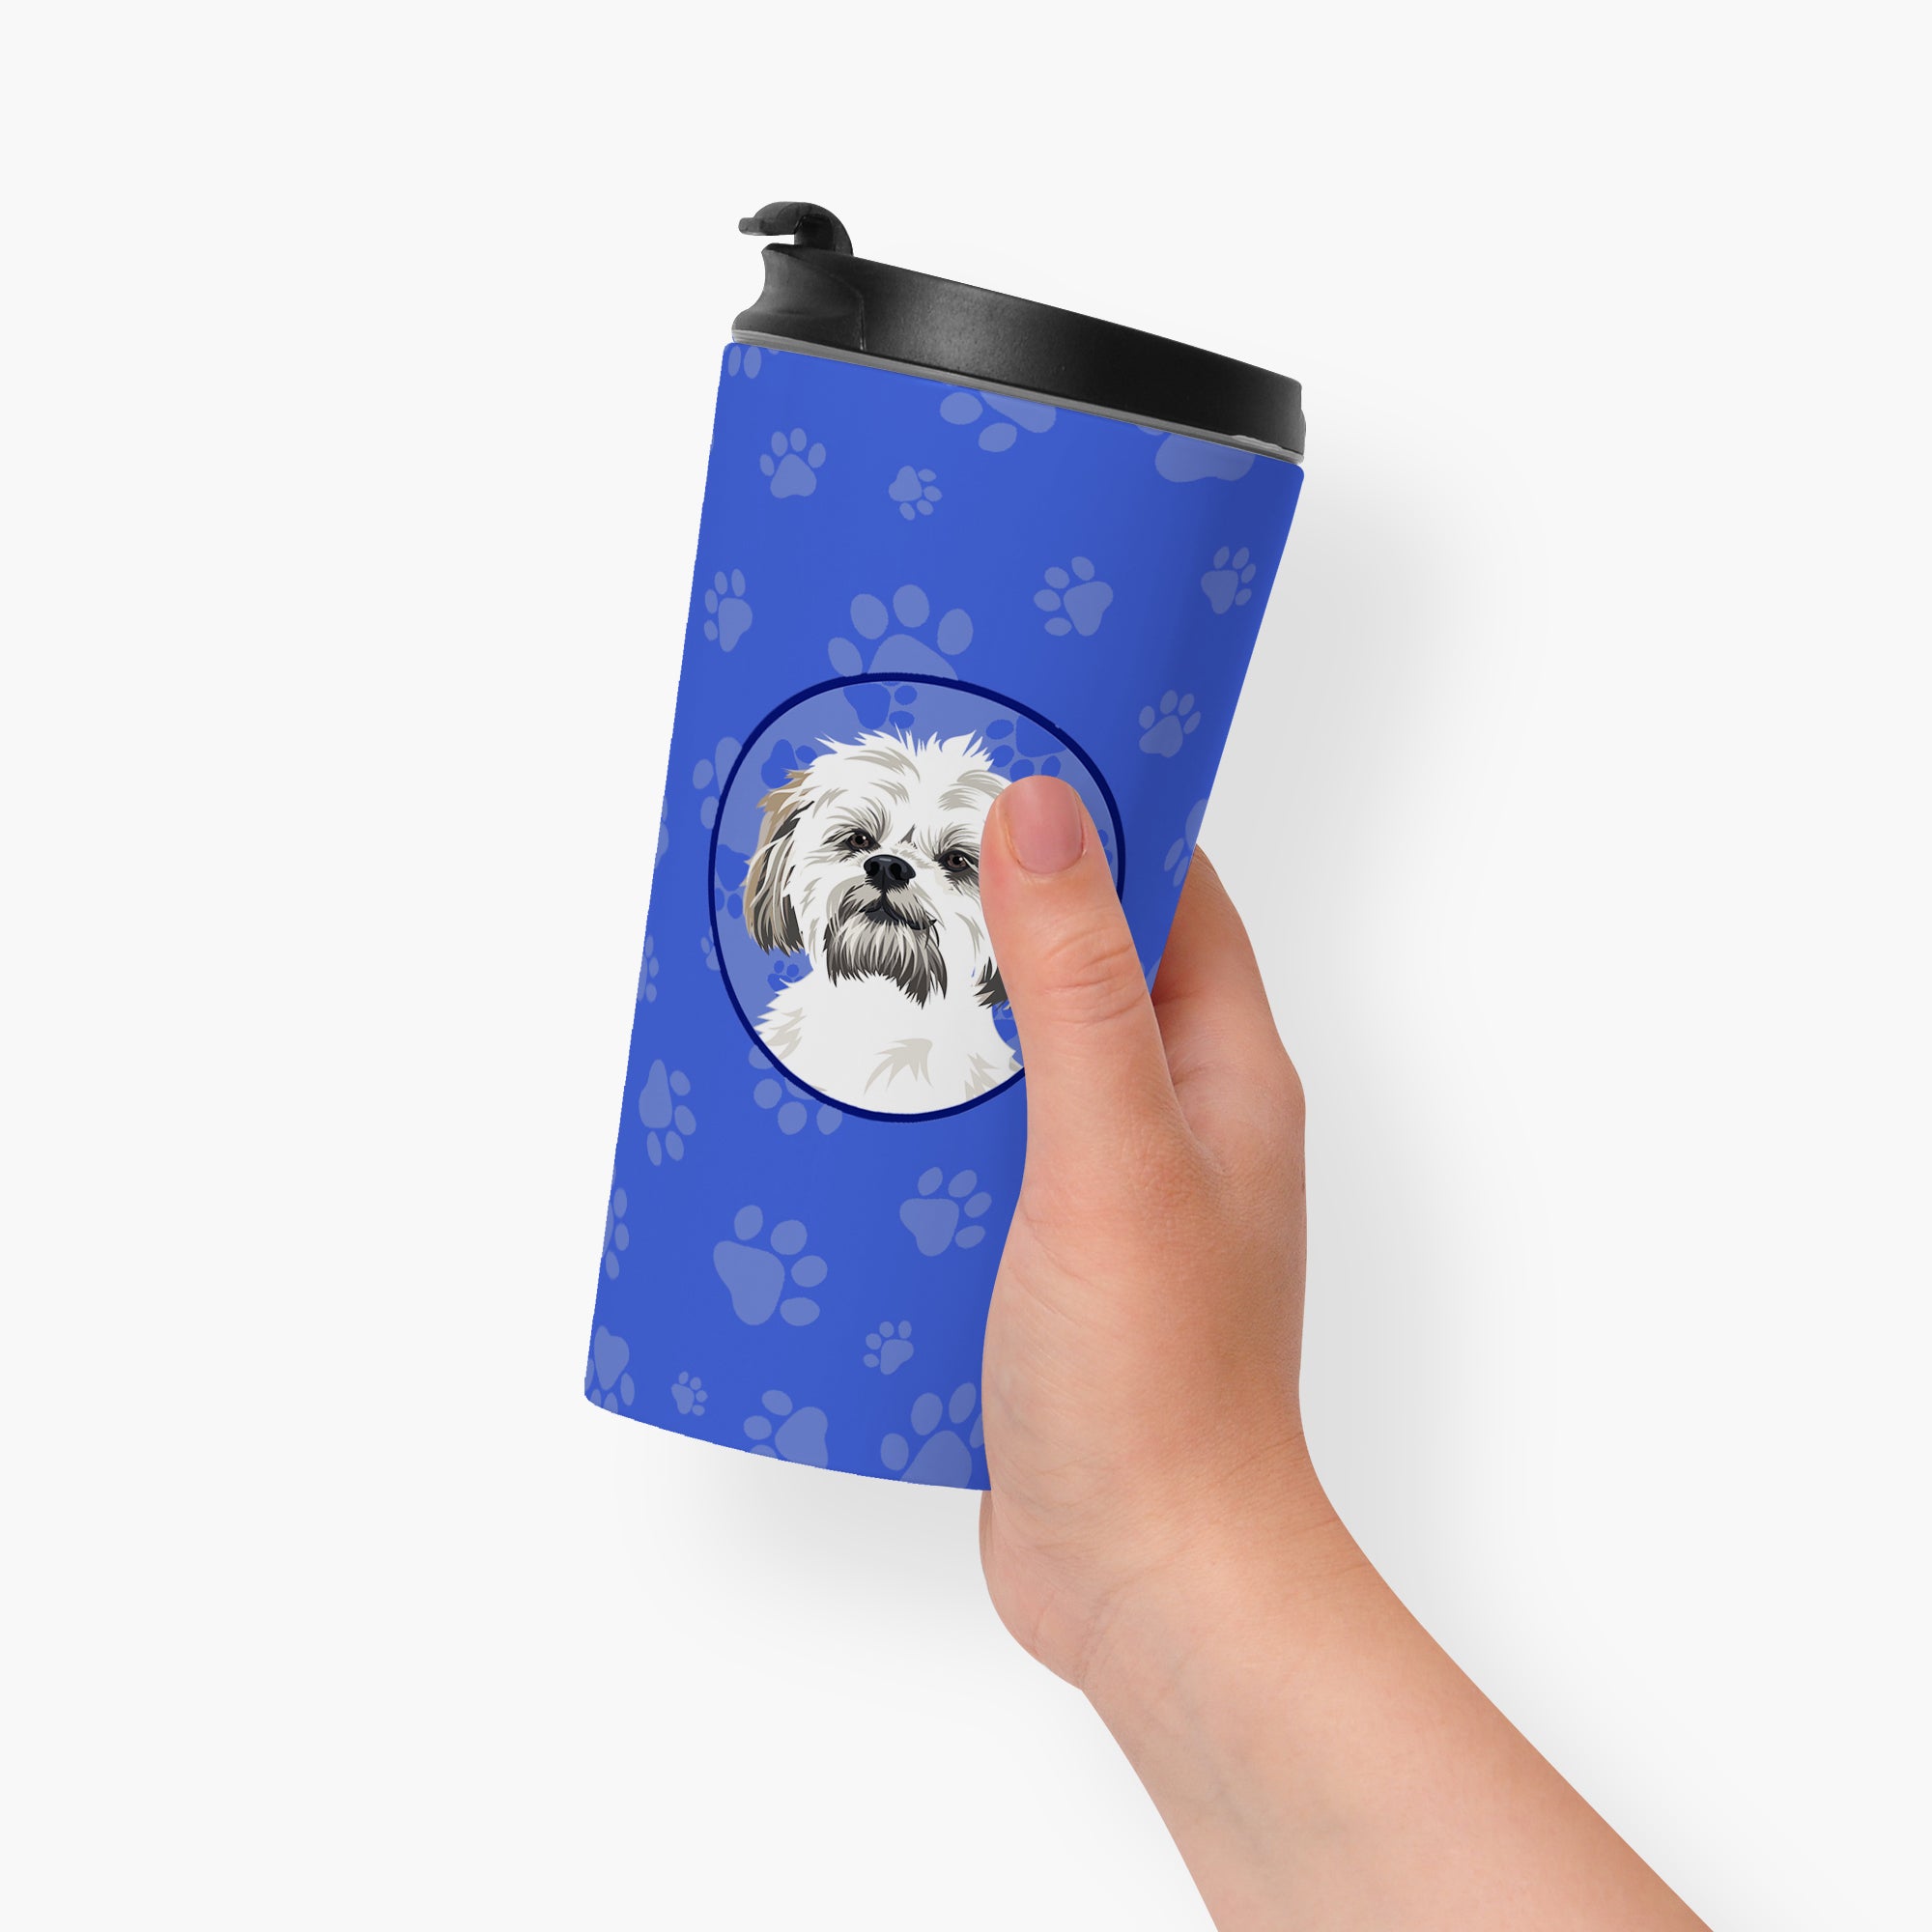 Shih-Tzu Silver Gold and White #1  Stainless Steel 16 oz  Tumbler - the-store.com